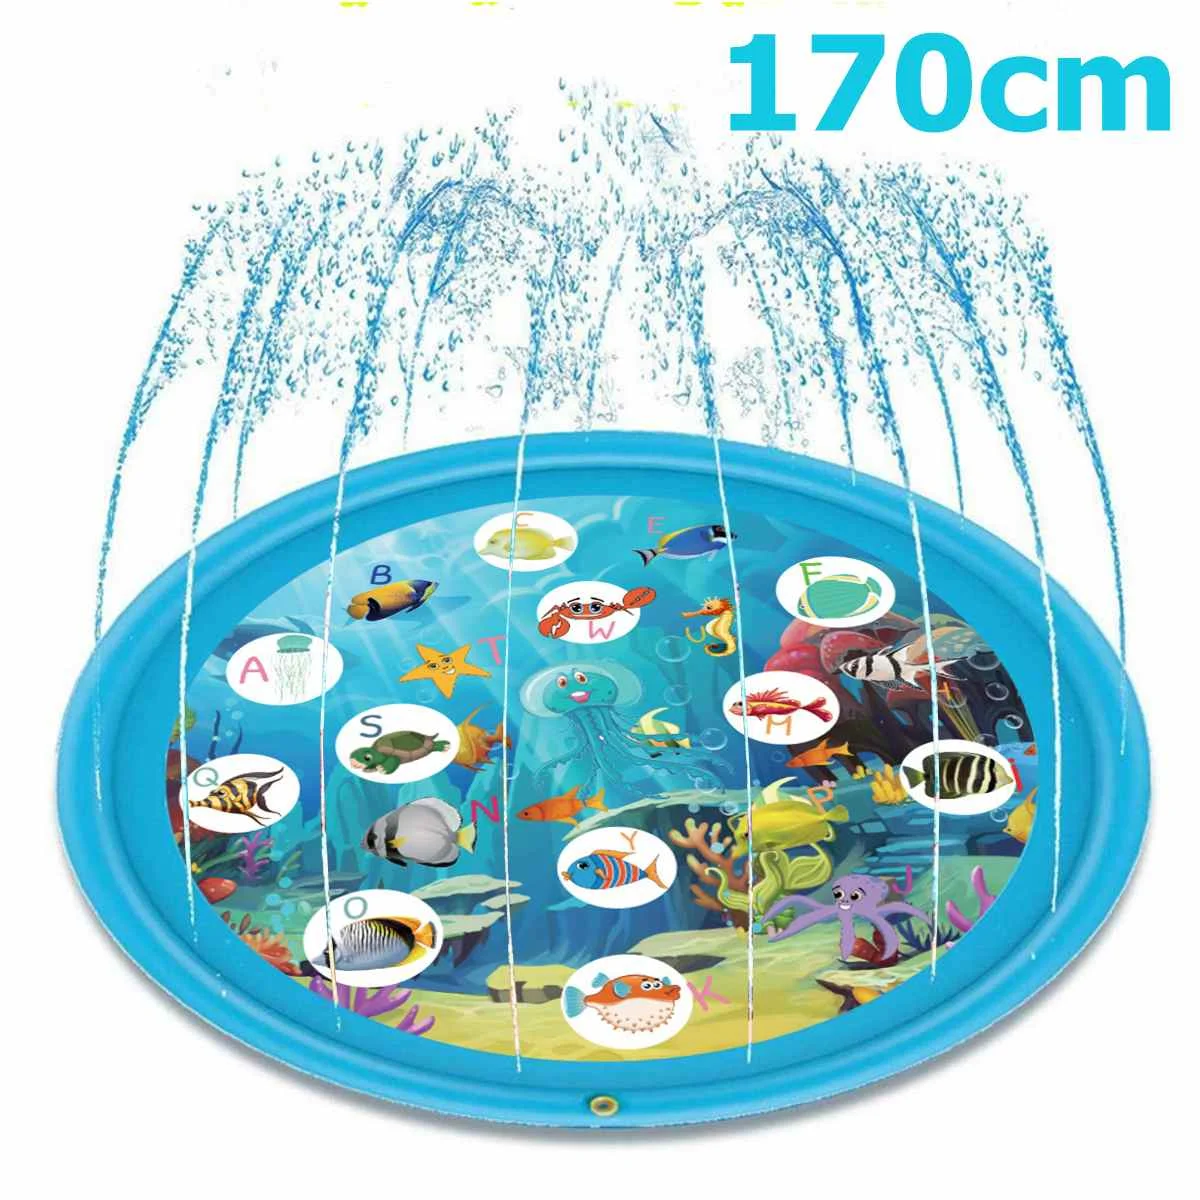 

Kids 170cm Sprinkler Pad Inflatable Spray Water Cushion Summer Play Water Mat Lawn Games Pad Play Toys Outdoor Tub Swiming Pool